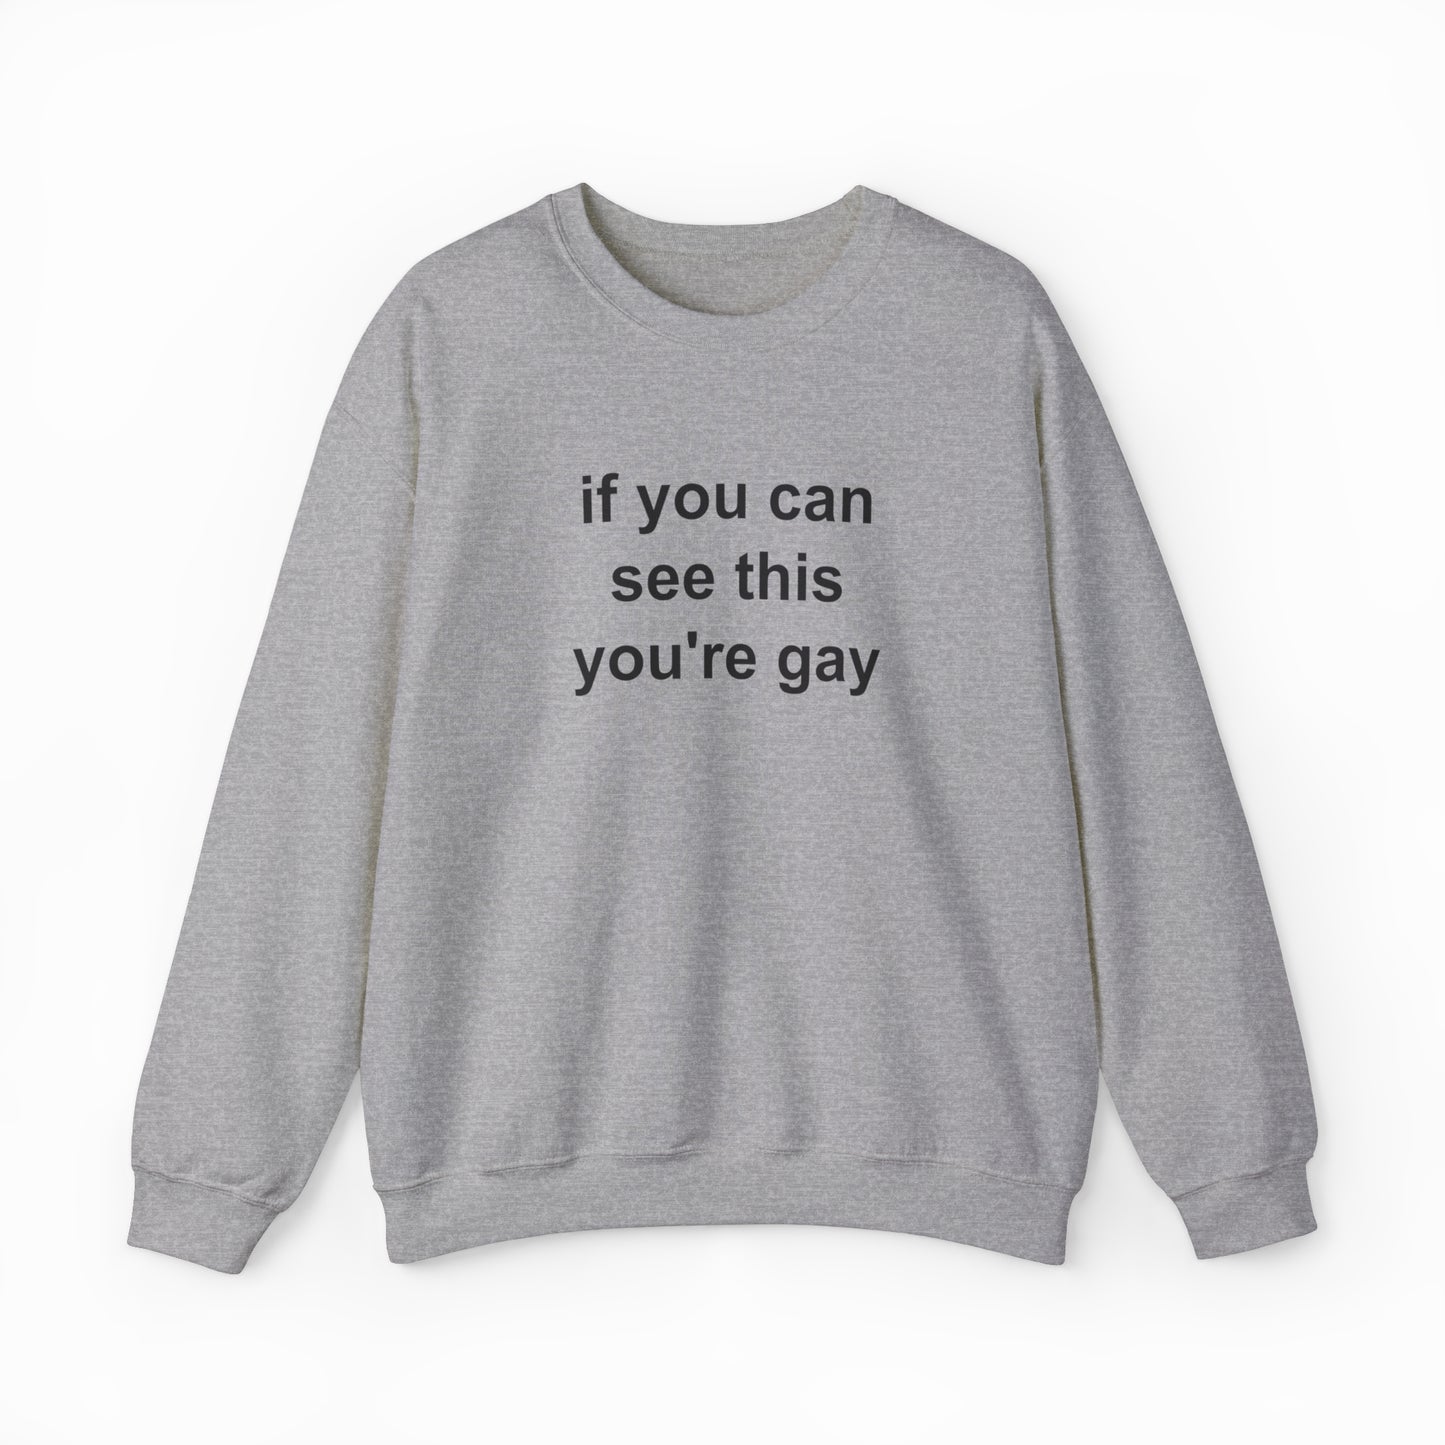 If You Can See This You're Gay Crewneck